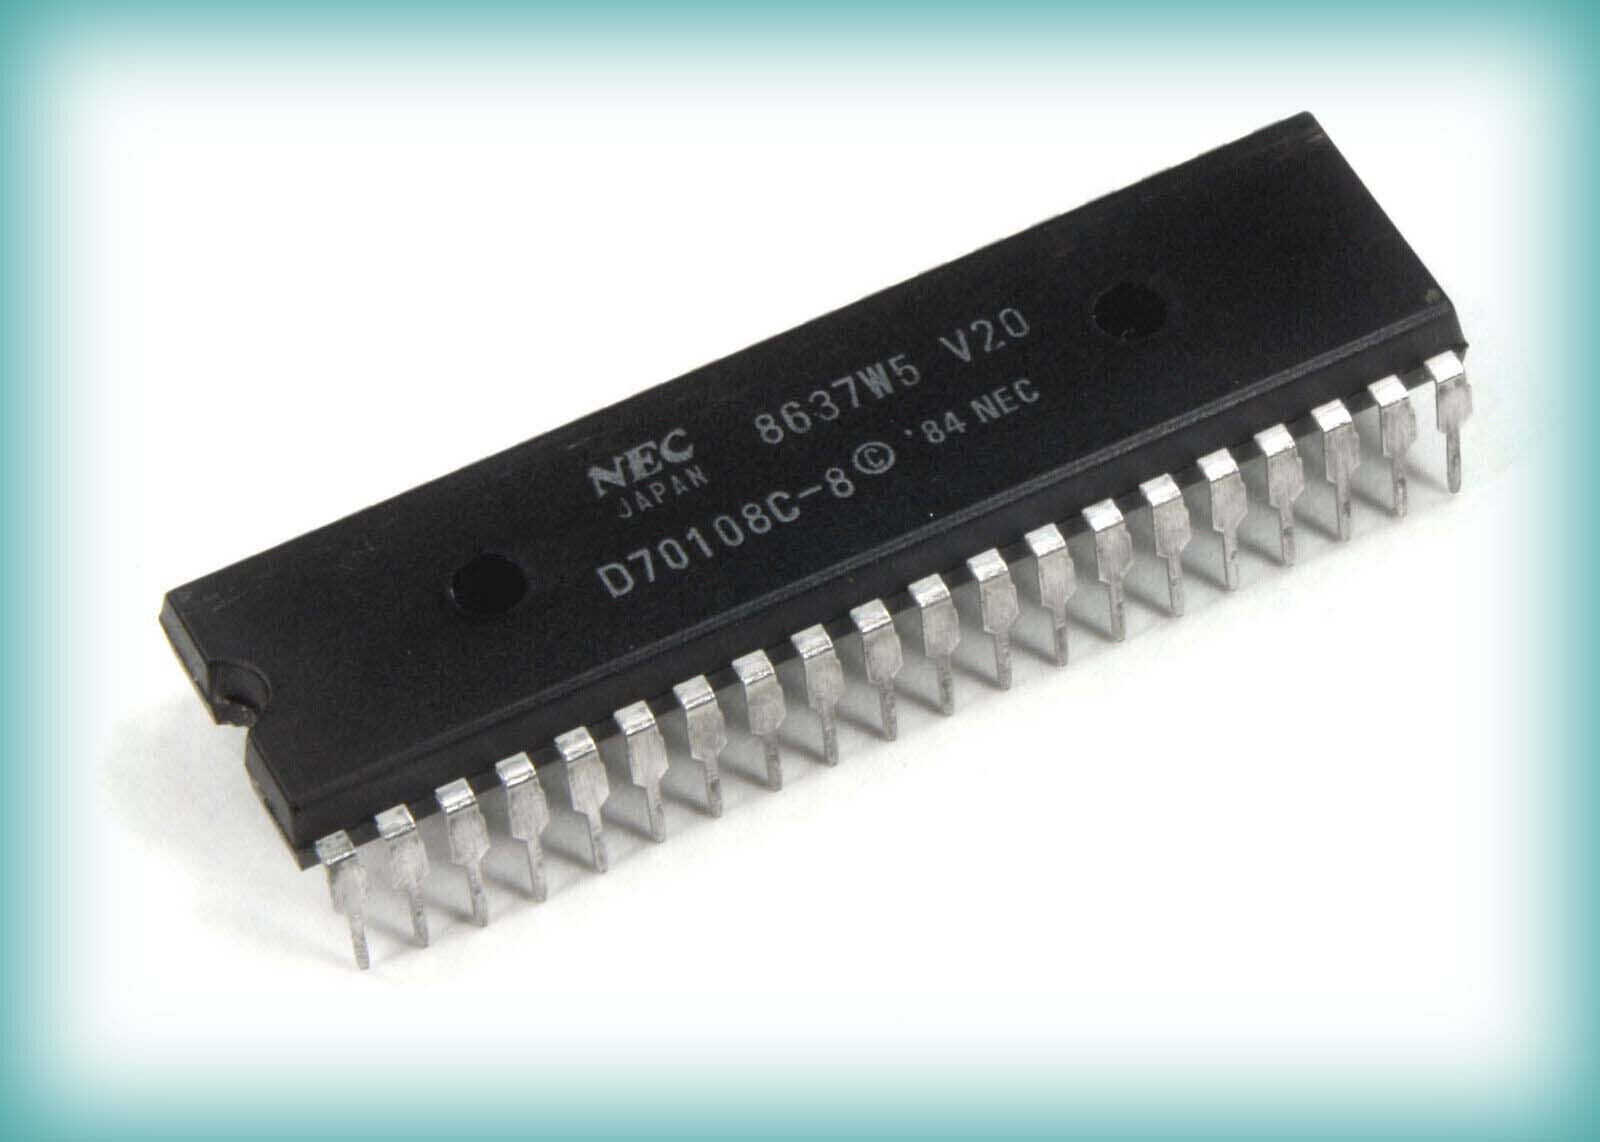 NEC V-20-8 Processor CPU, easy pin-compatible upgrade to 8088, measurably faster